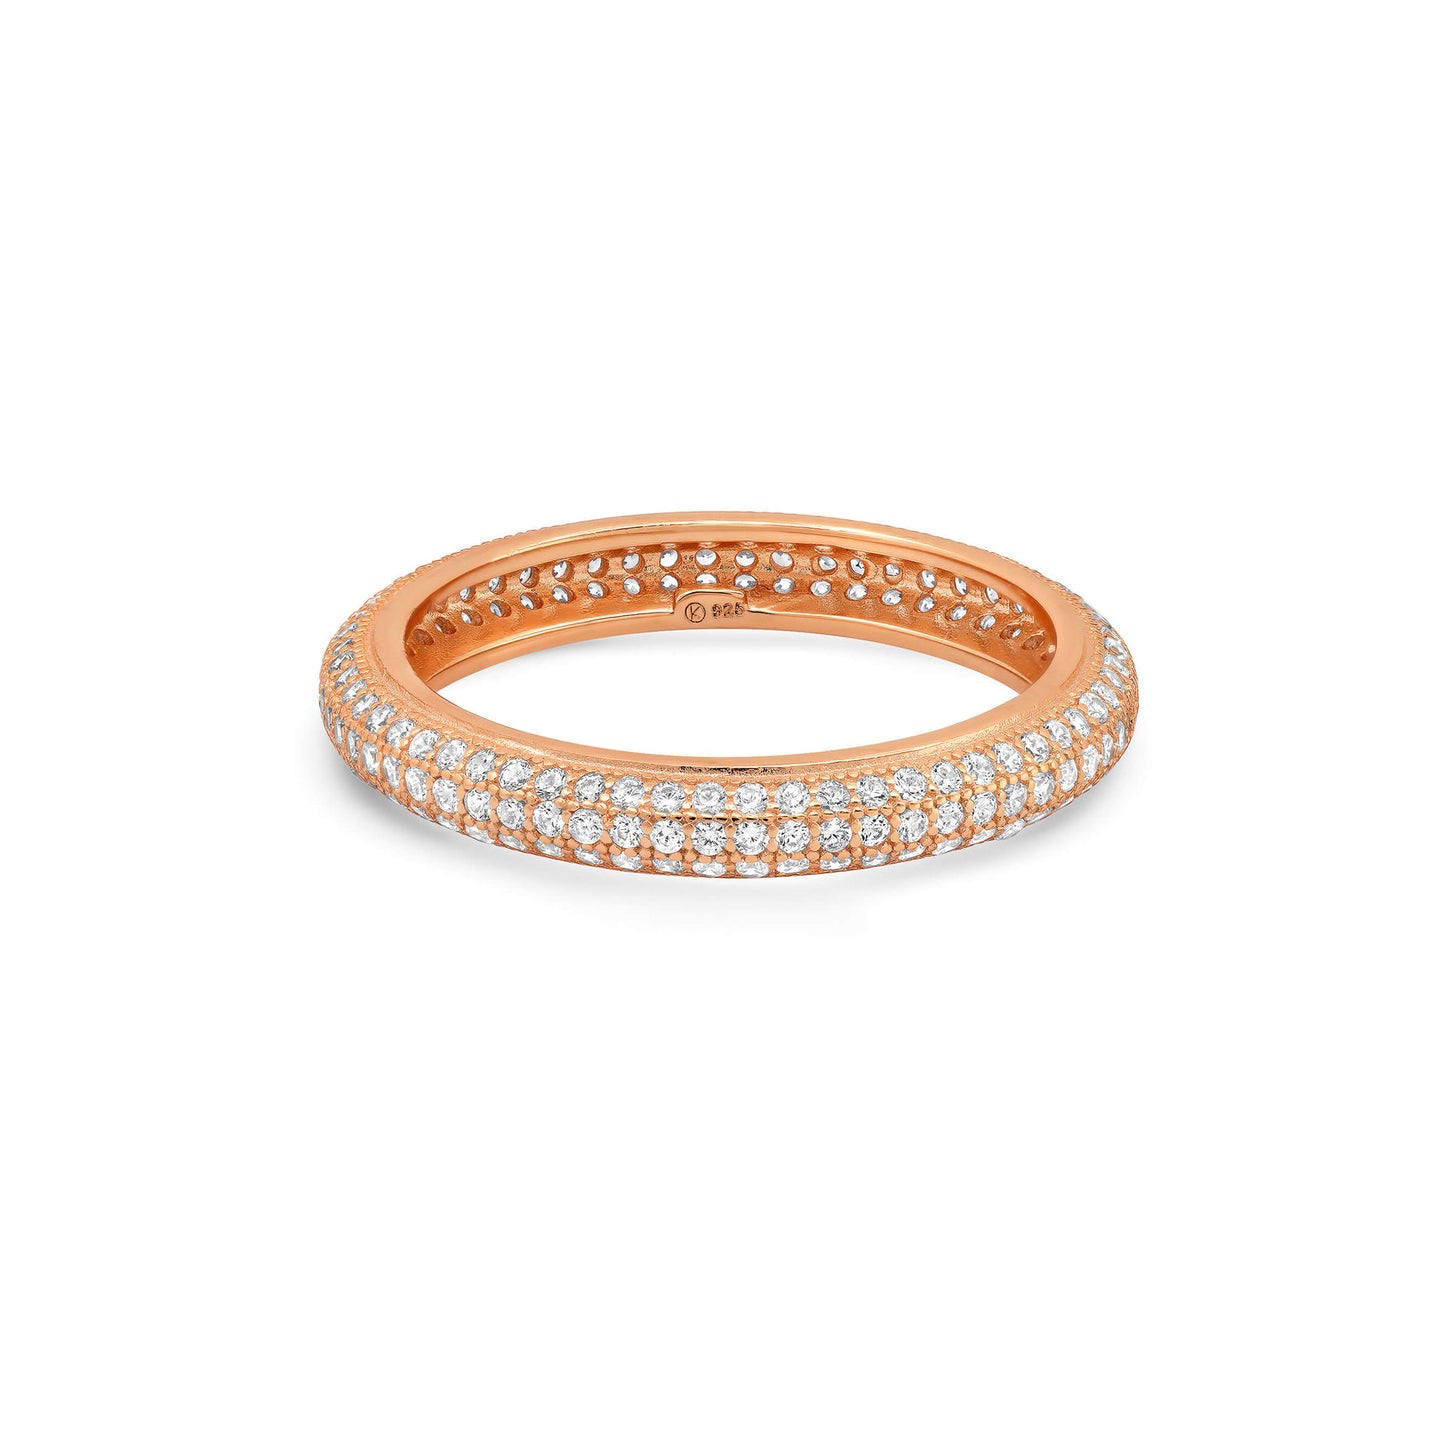 TRIPLE ROW PAVE ETERNITY RING, ROSE GOLD